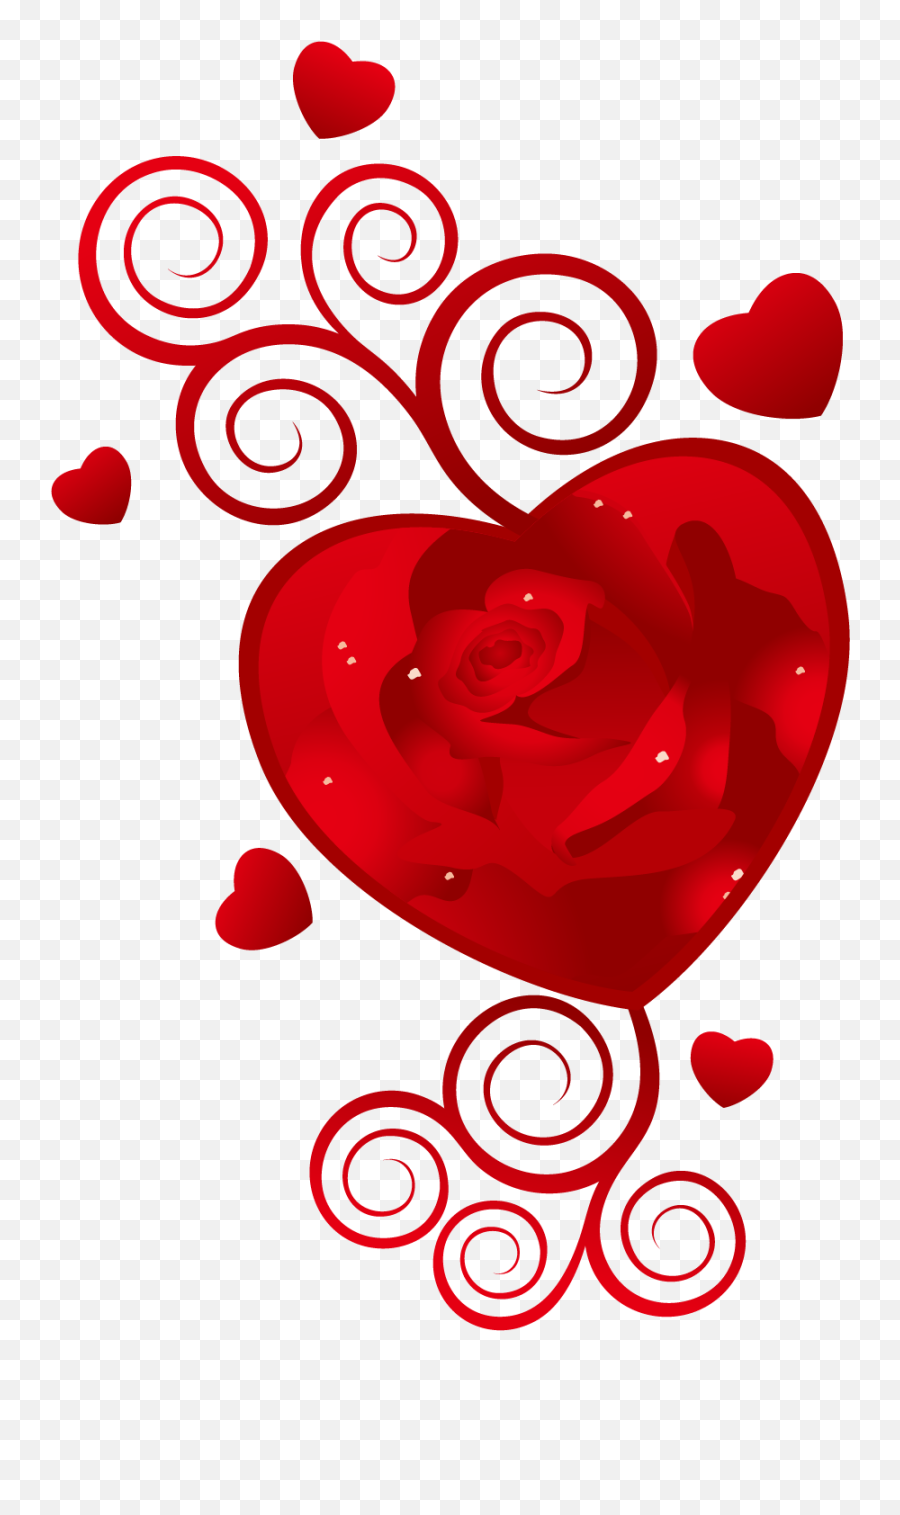 Download Heart February 14 Wish Valentines Vector Rose - Week Happy Valentine Day 2020 Emoji,Rose Clipart Png